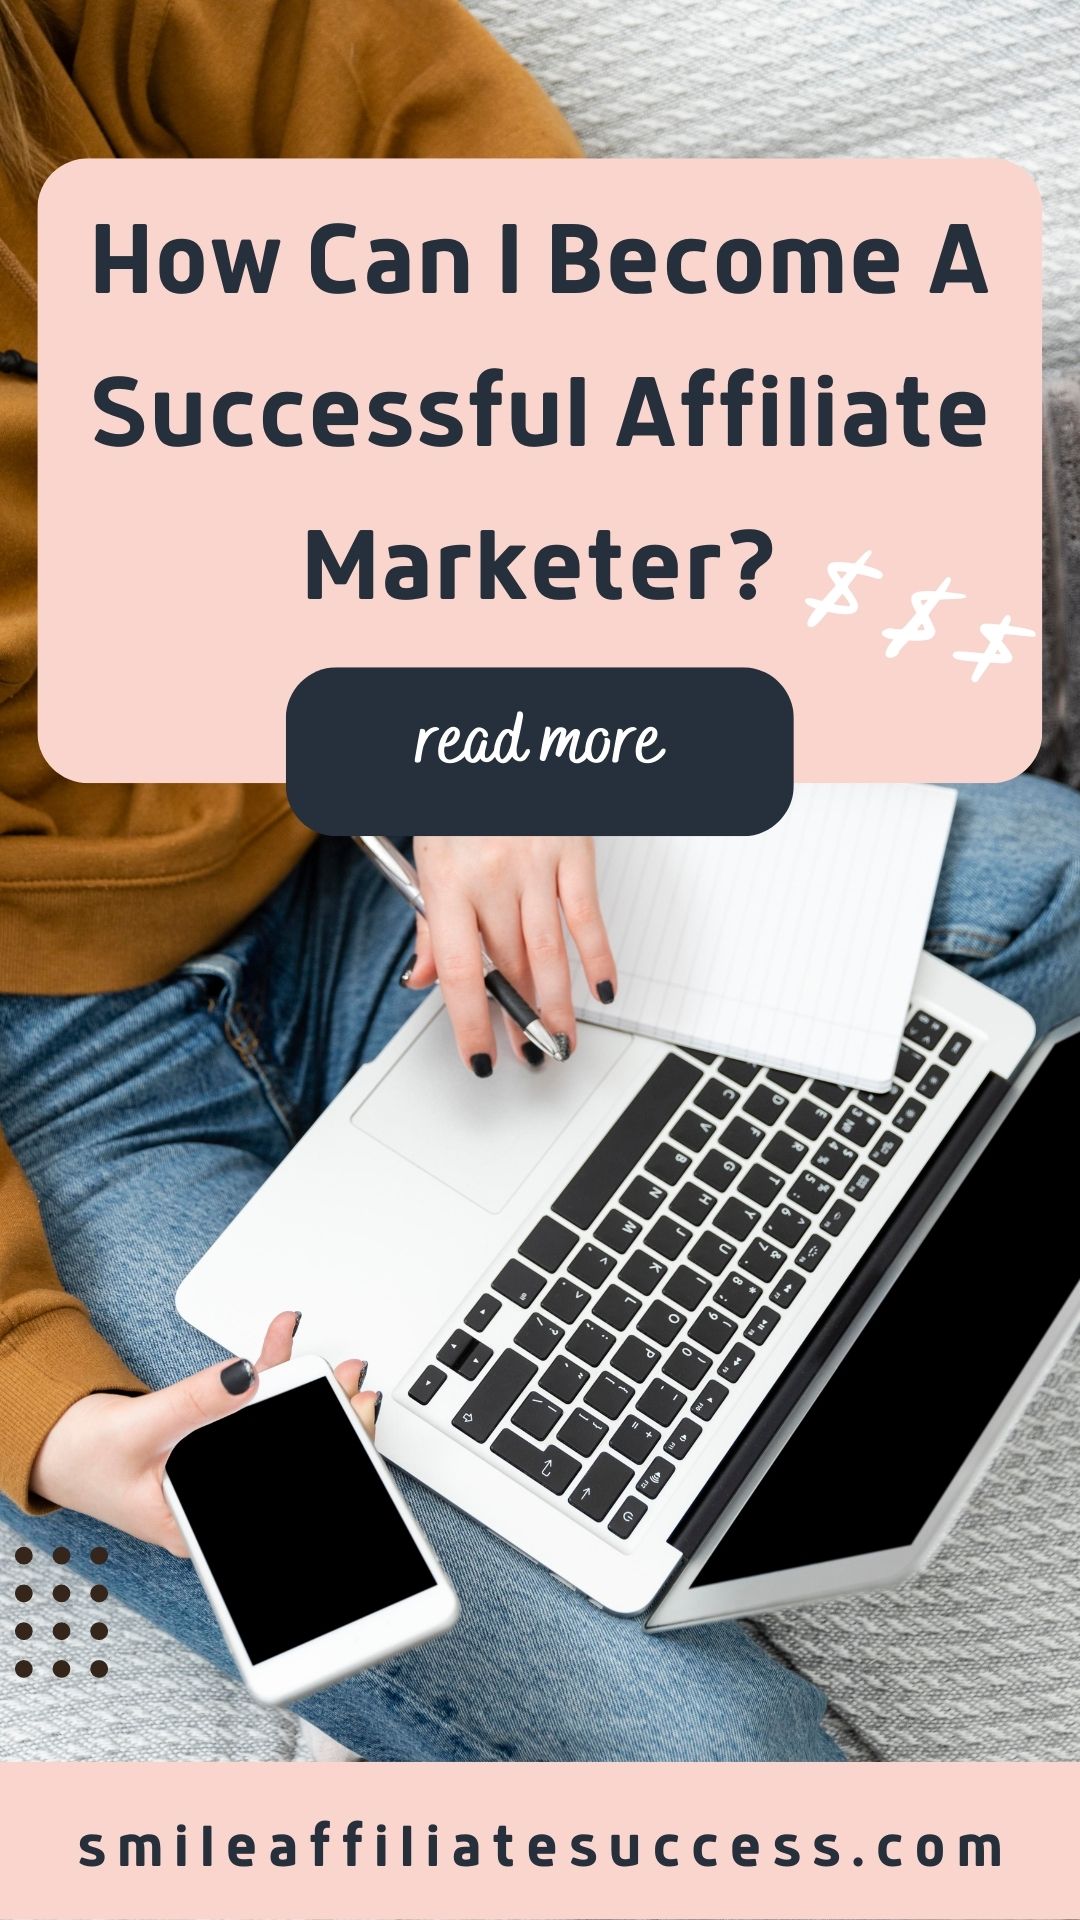 How Can I Become A Successful Affiliate Marketer?